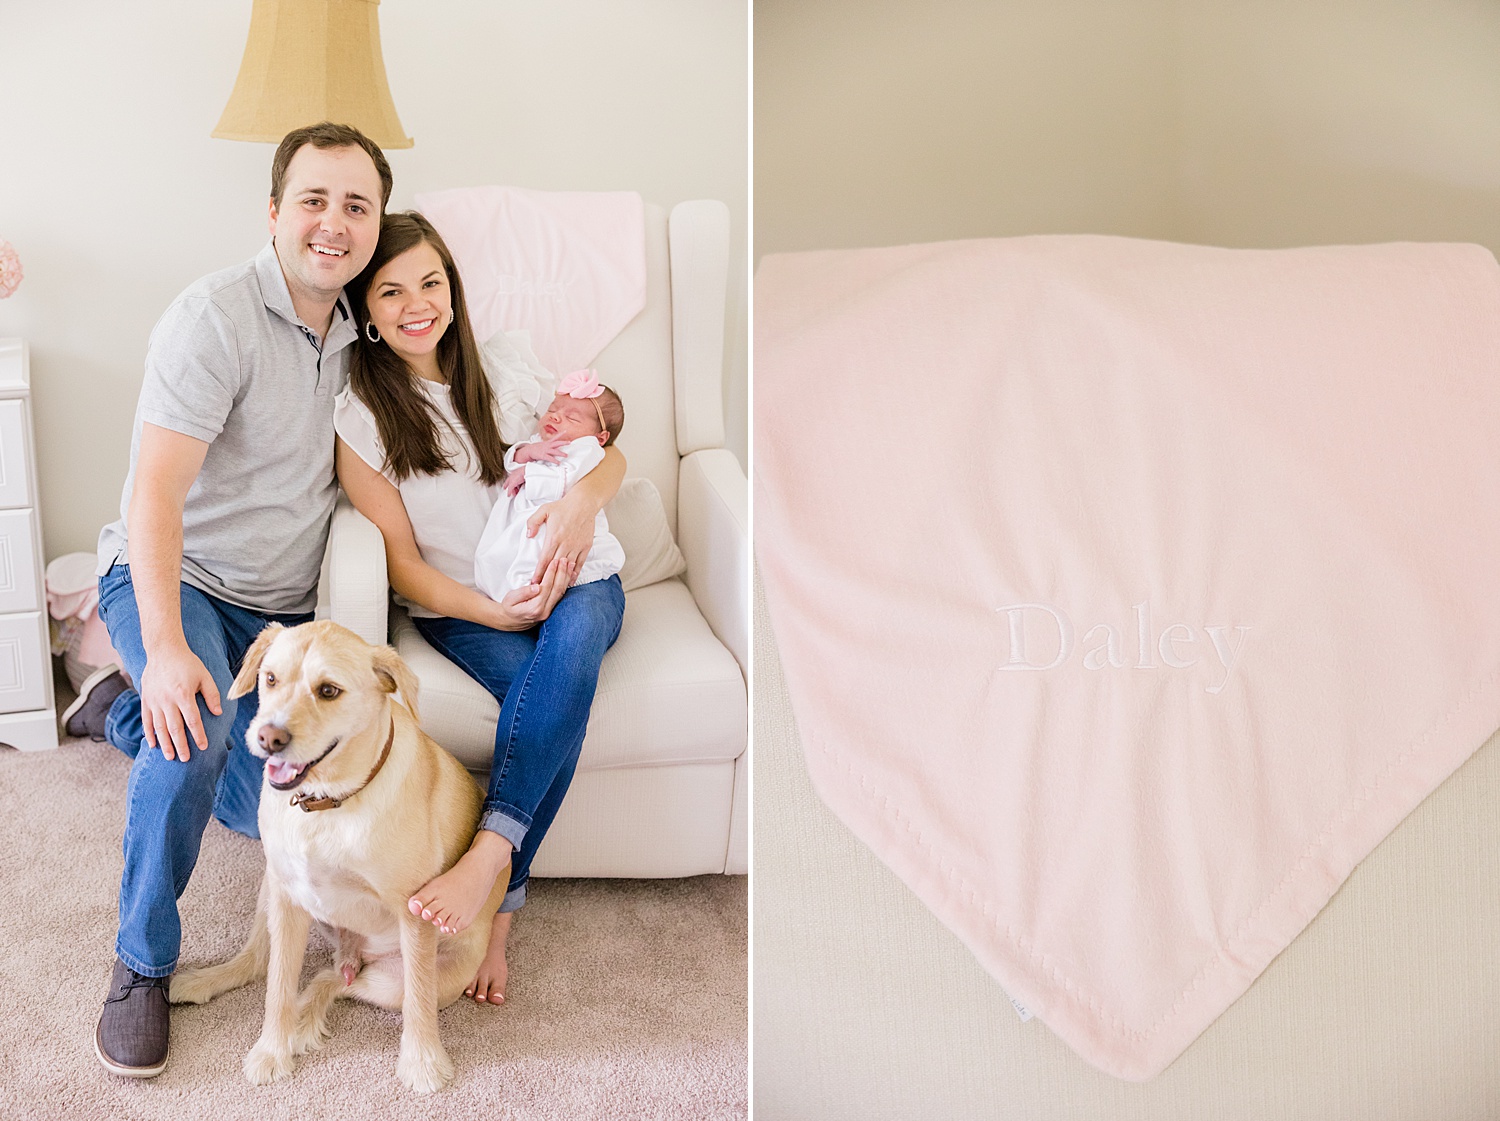 parents hold newborn daughter sitting in rocker with their dog at their feet